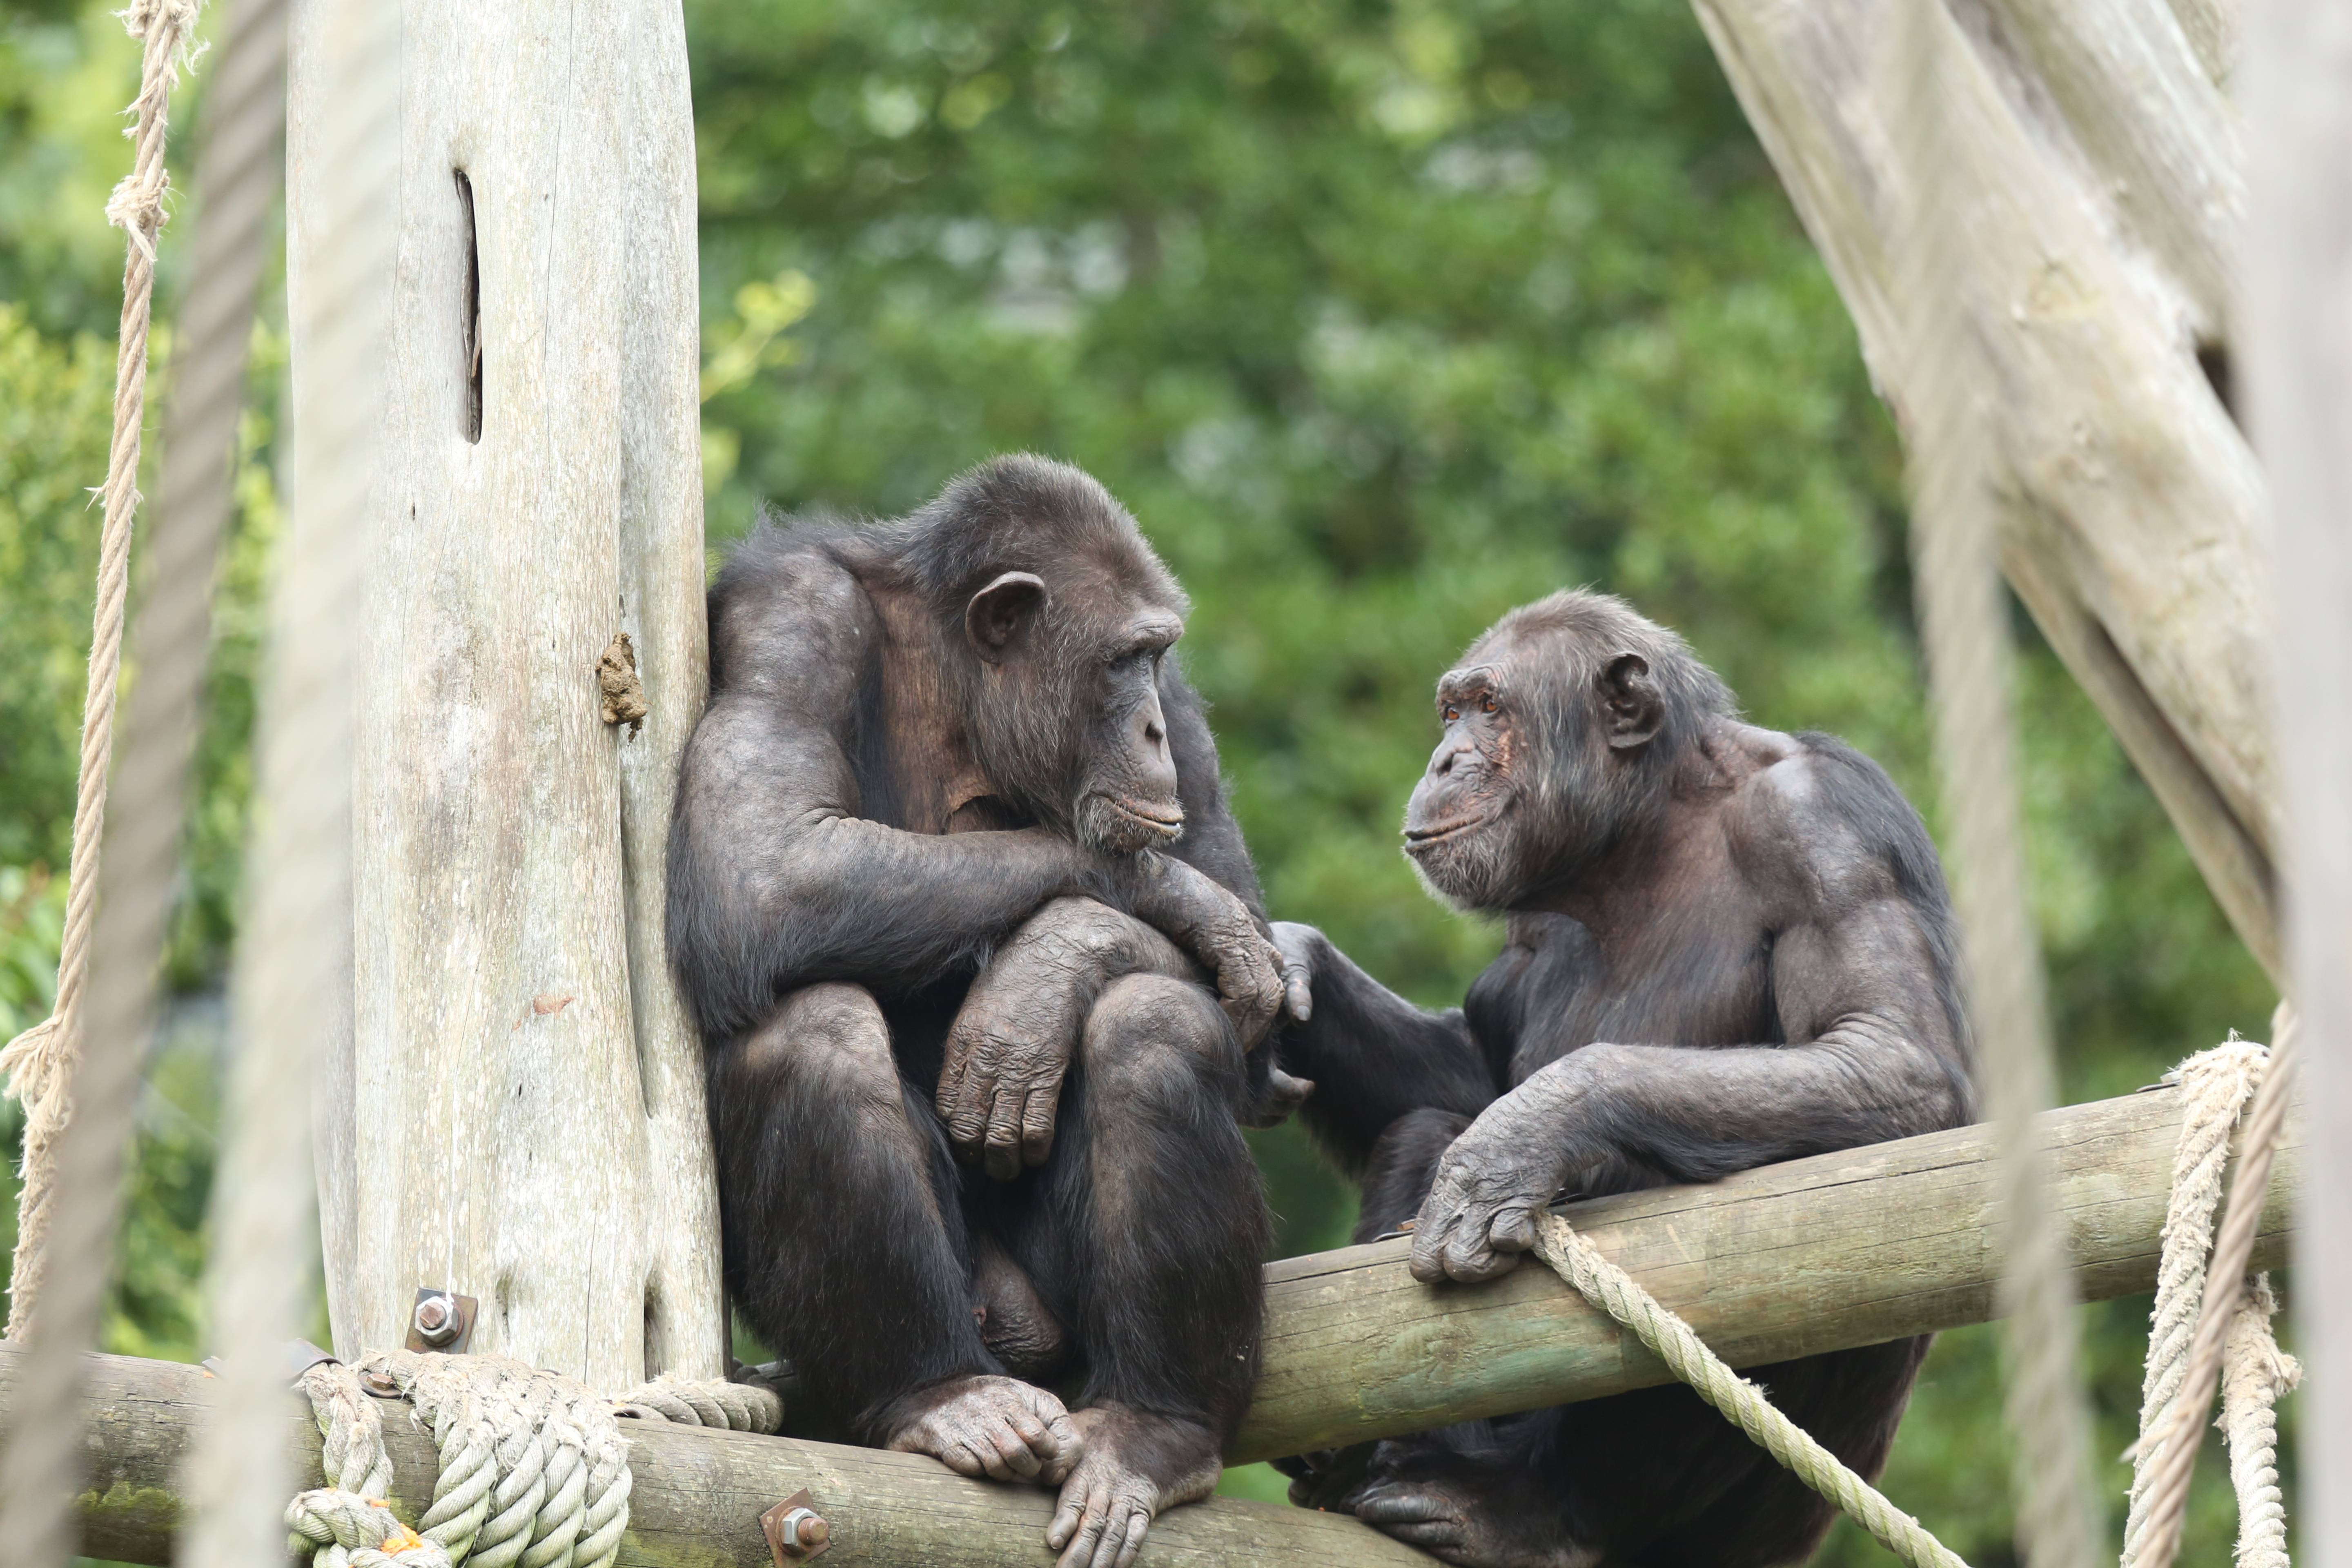 Liberius and Qafzeh chimpanzees sitting together on climbing frame

Image: KATE GROUNDS